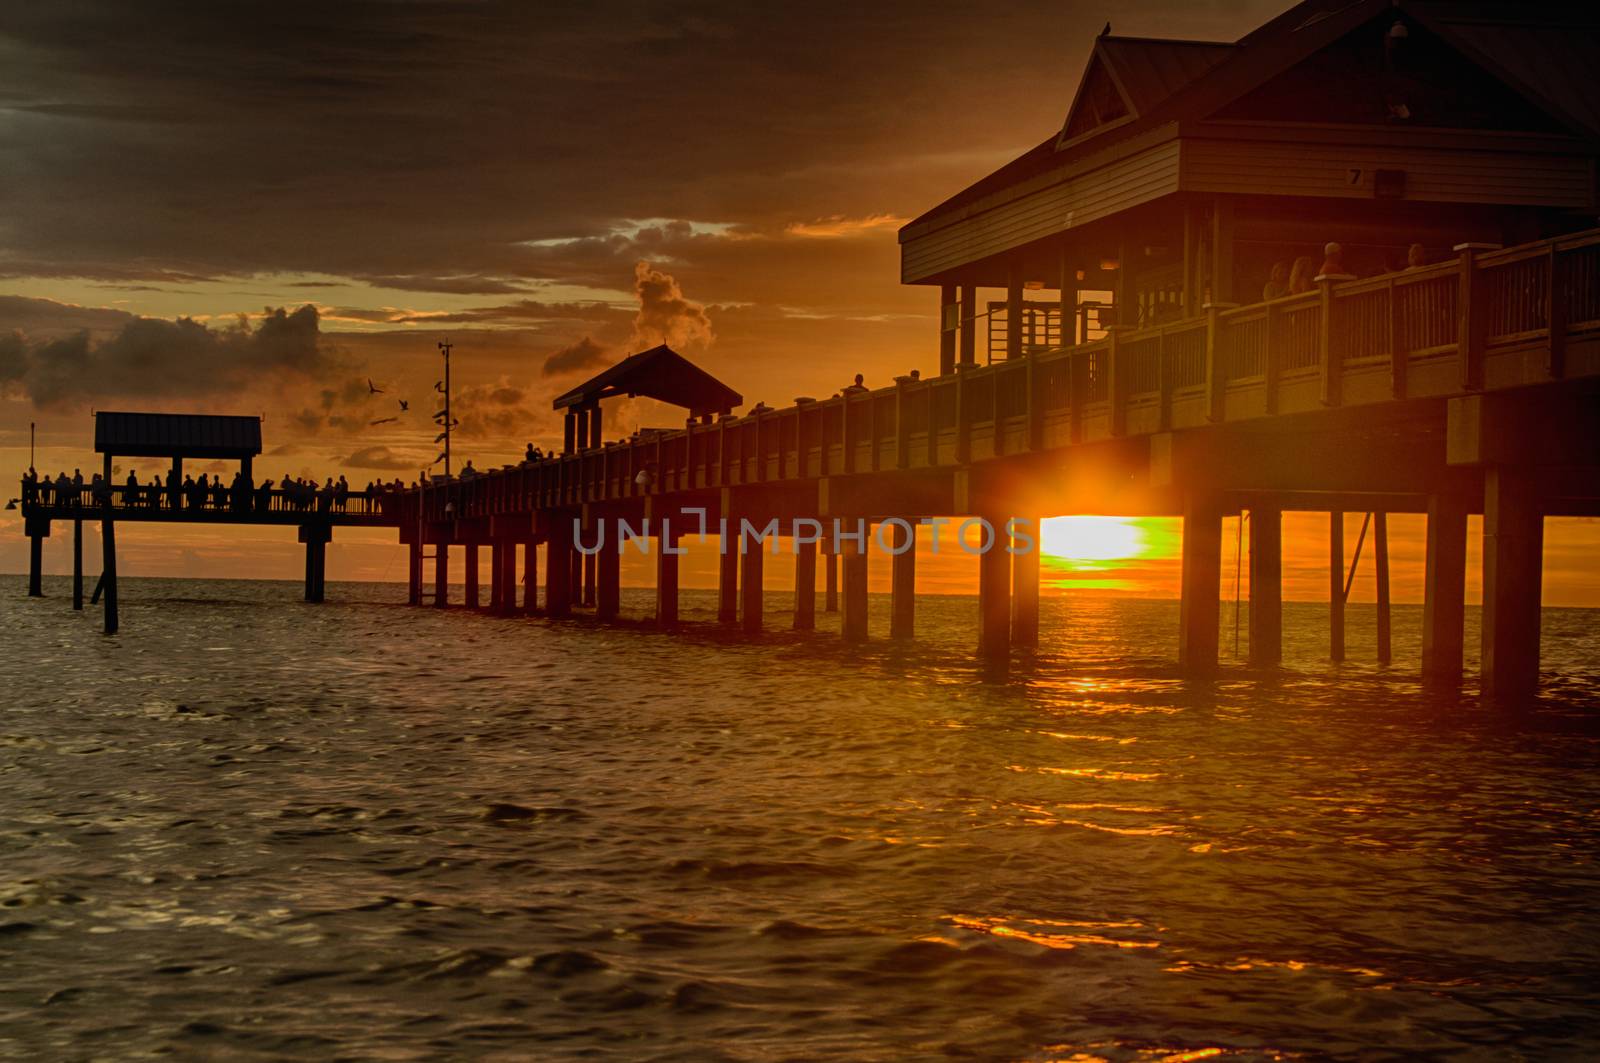 Sunset at the pier. by tedanddees